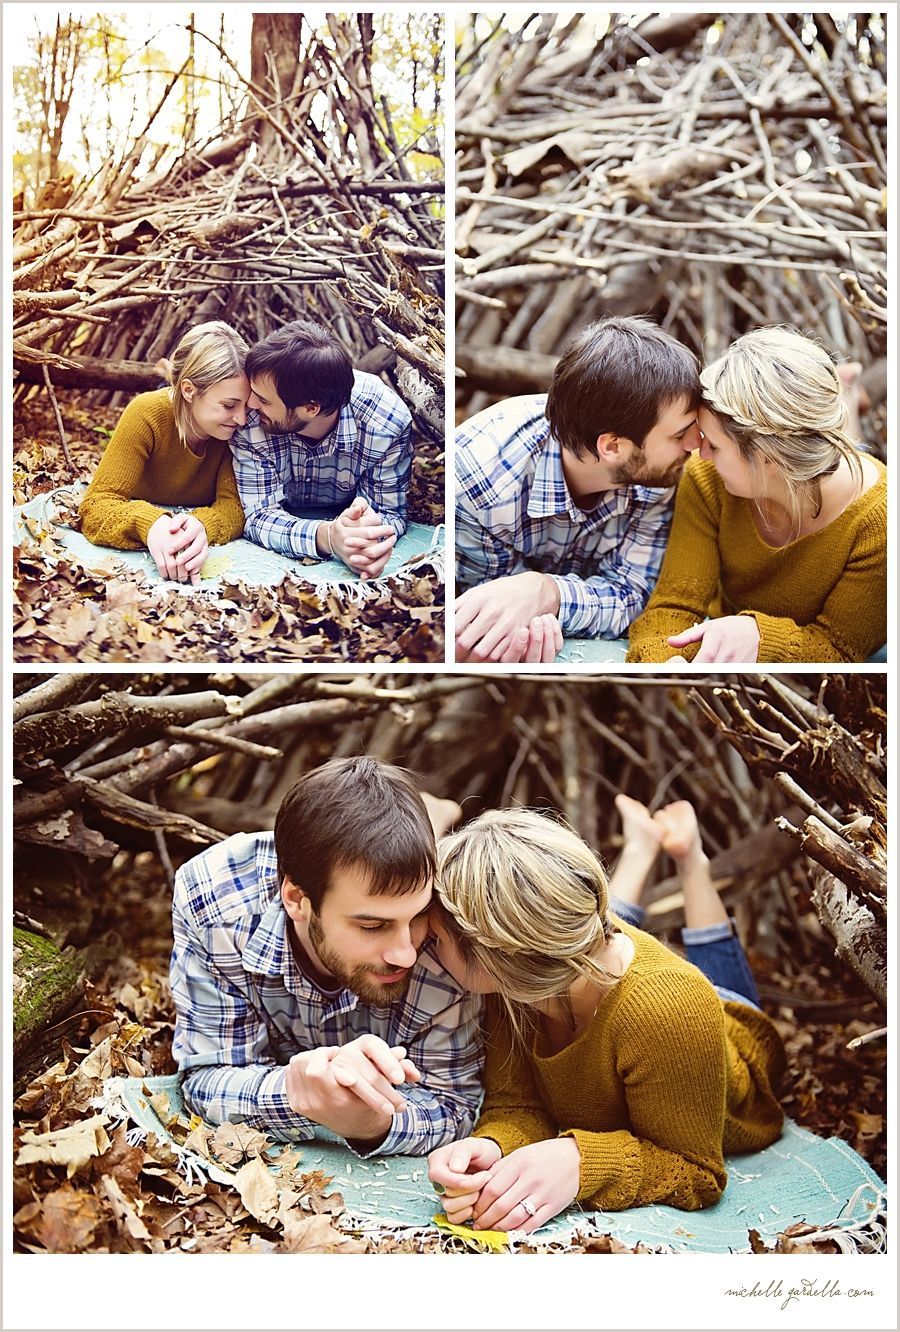 Engagement Photography by Michelle Gardella Photography #engagement #photography